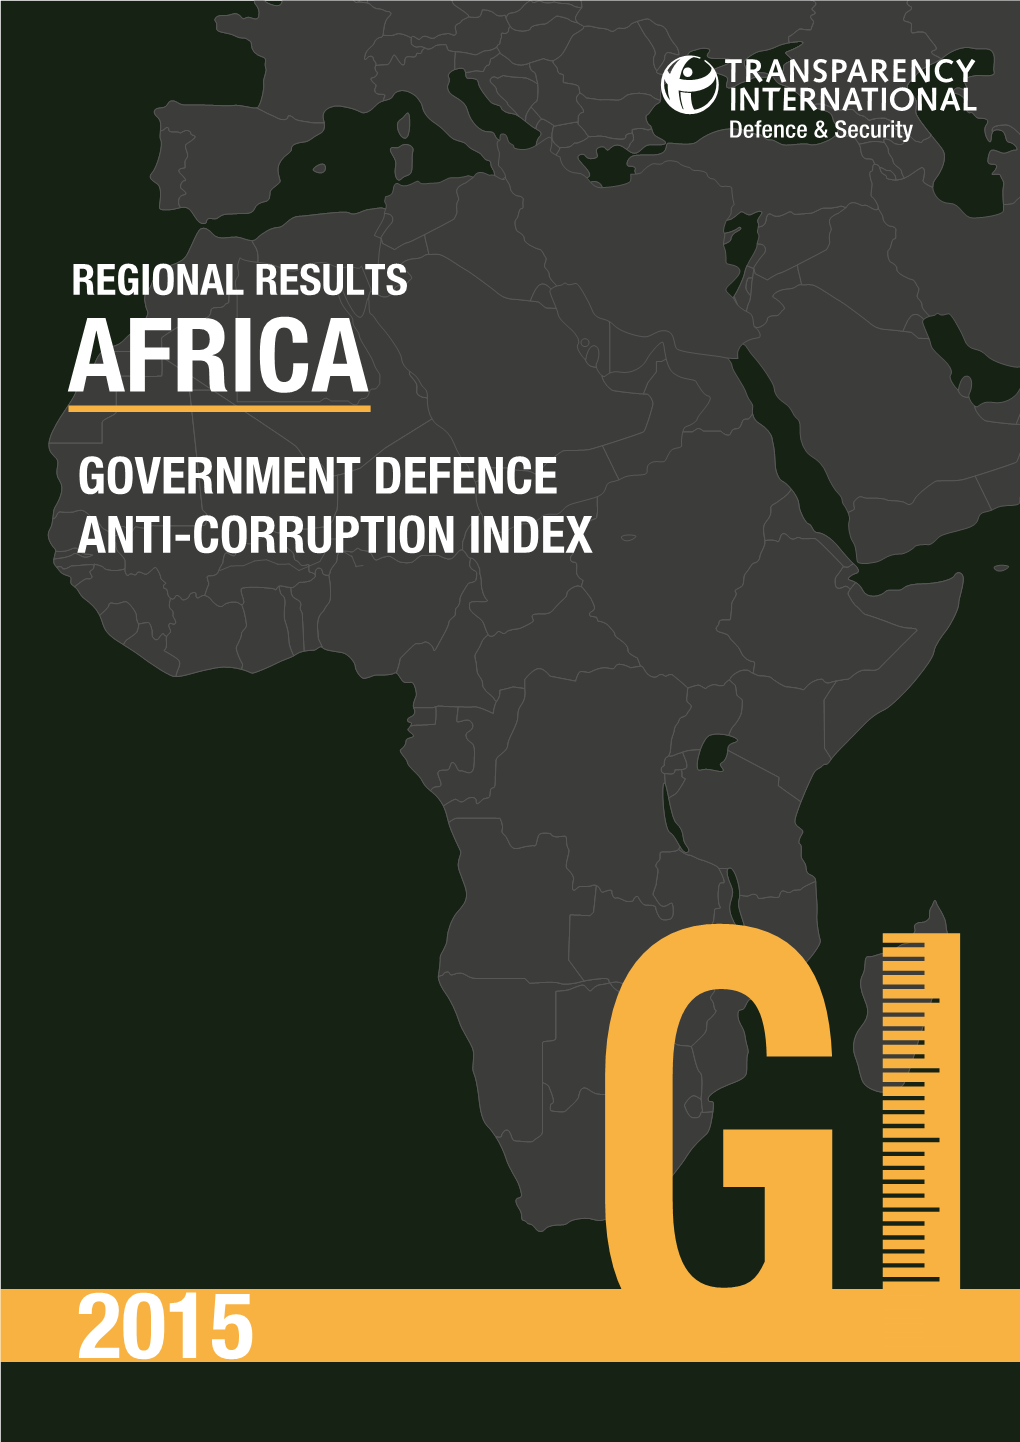 Africa Government Defence Anti-Corruption Index